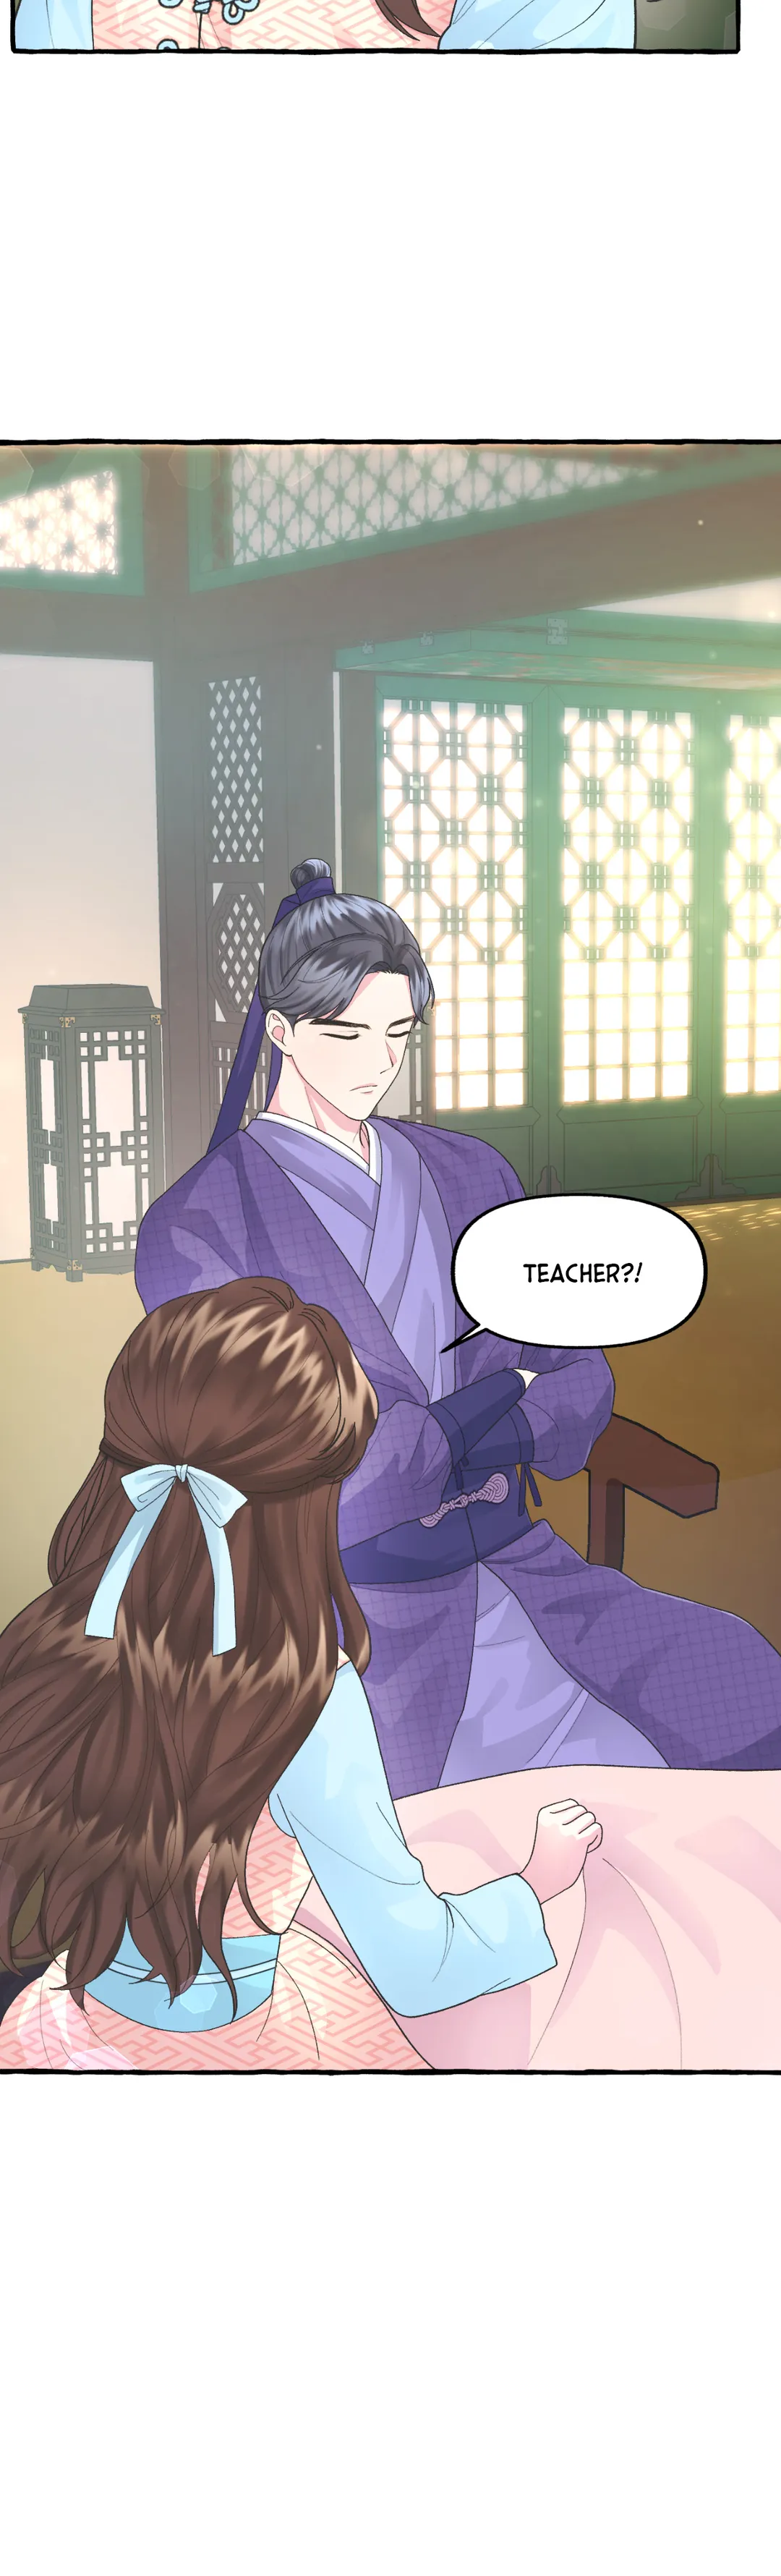 Cheer Up, Your Highness! chapter 12